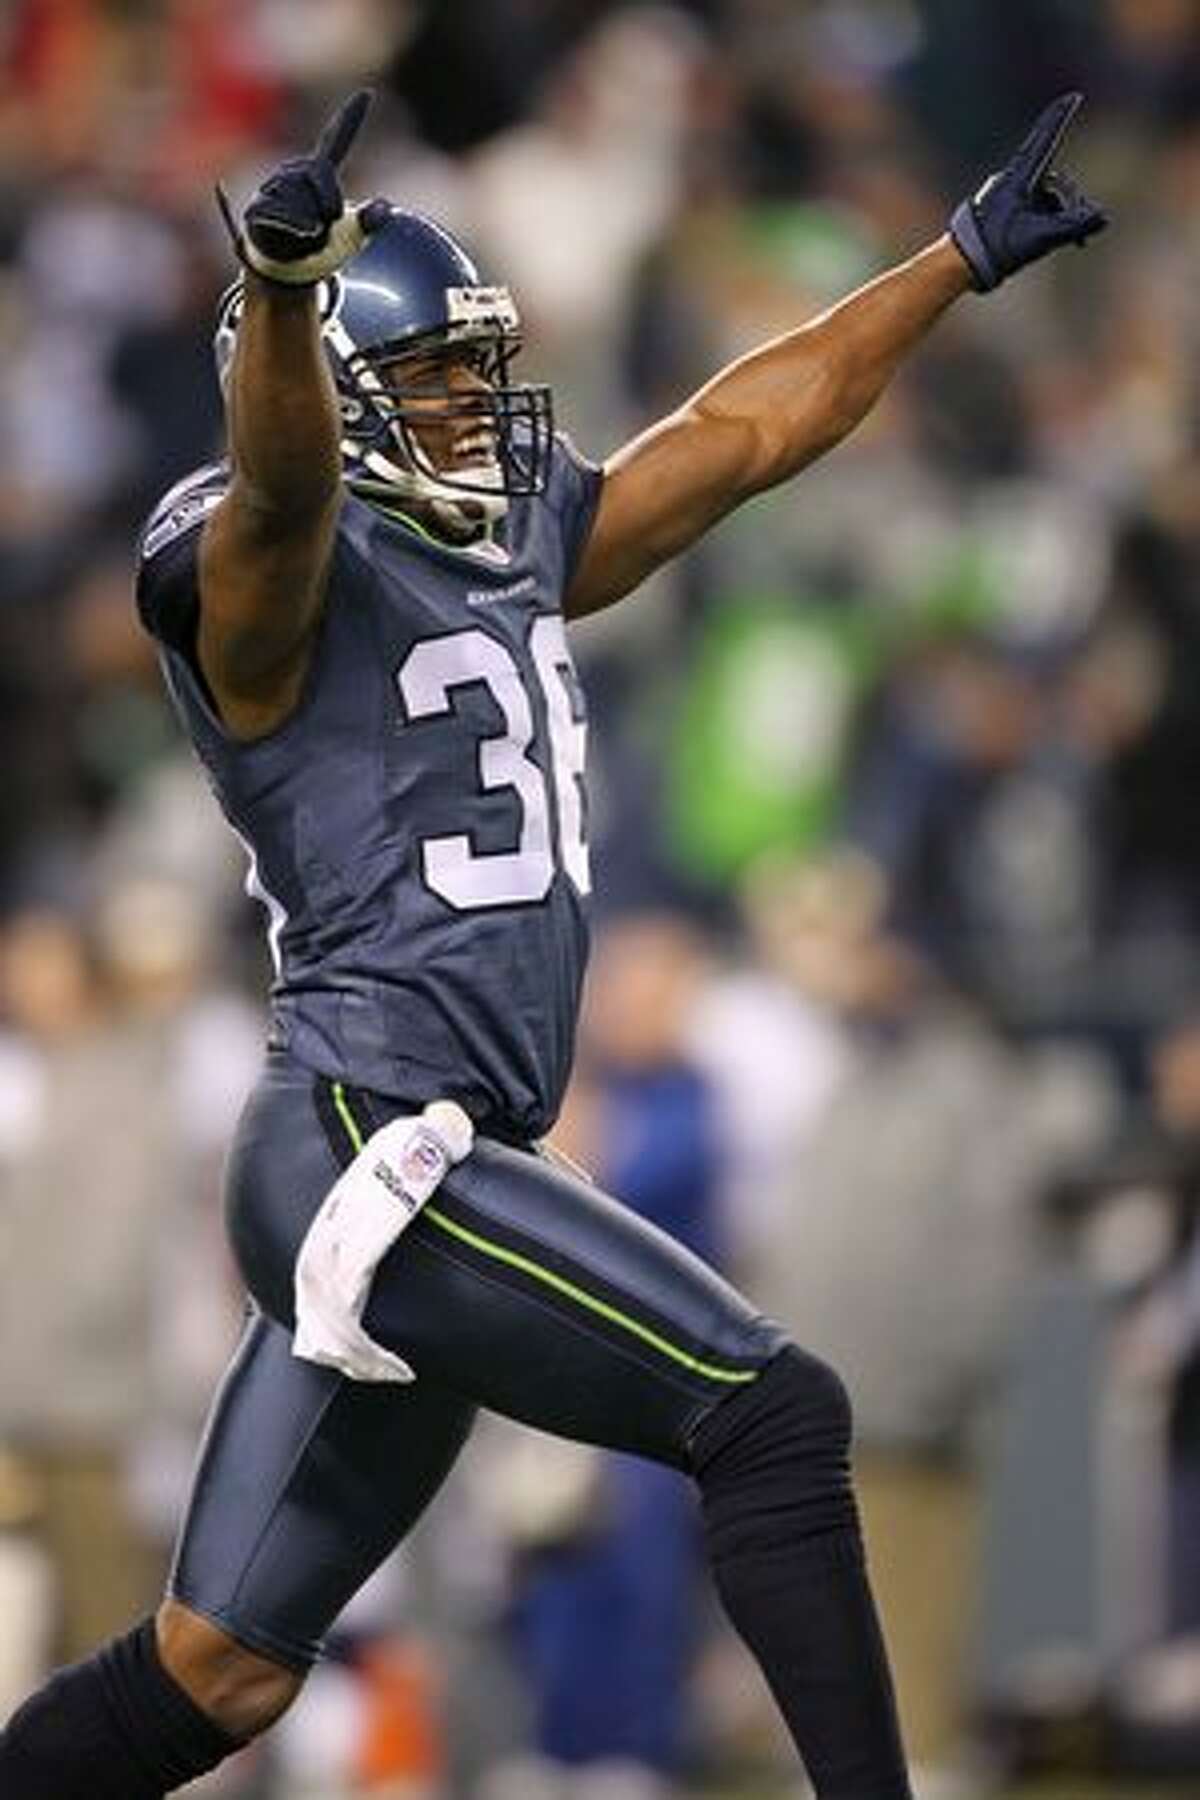 Lawyer Milloy: Lincoln High School (Tacoma). College: University of Washington Milloy was a star safety from 1996 to 2010 for teams including the New England Patriots, Buffalo Bills, Atlanta Falcons and Seattle Seahawks. Career highlights: Super Bowl champion: 2001 4x Pro Bowl: 1998, 1999, 2001, 2002 First team All-Pro: 1999 Second team All-Pro New England Patriots All-1990s Team New England Patriots All-2000s Team